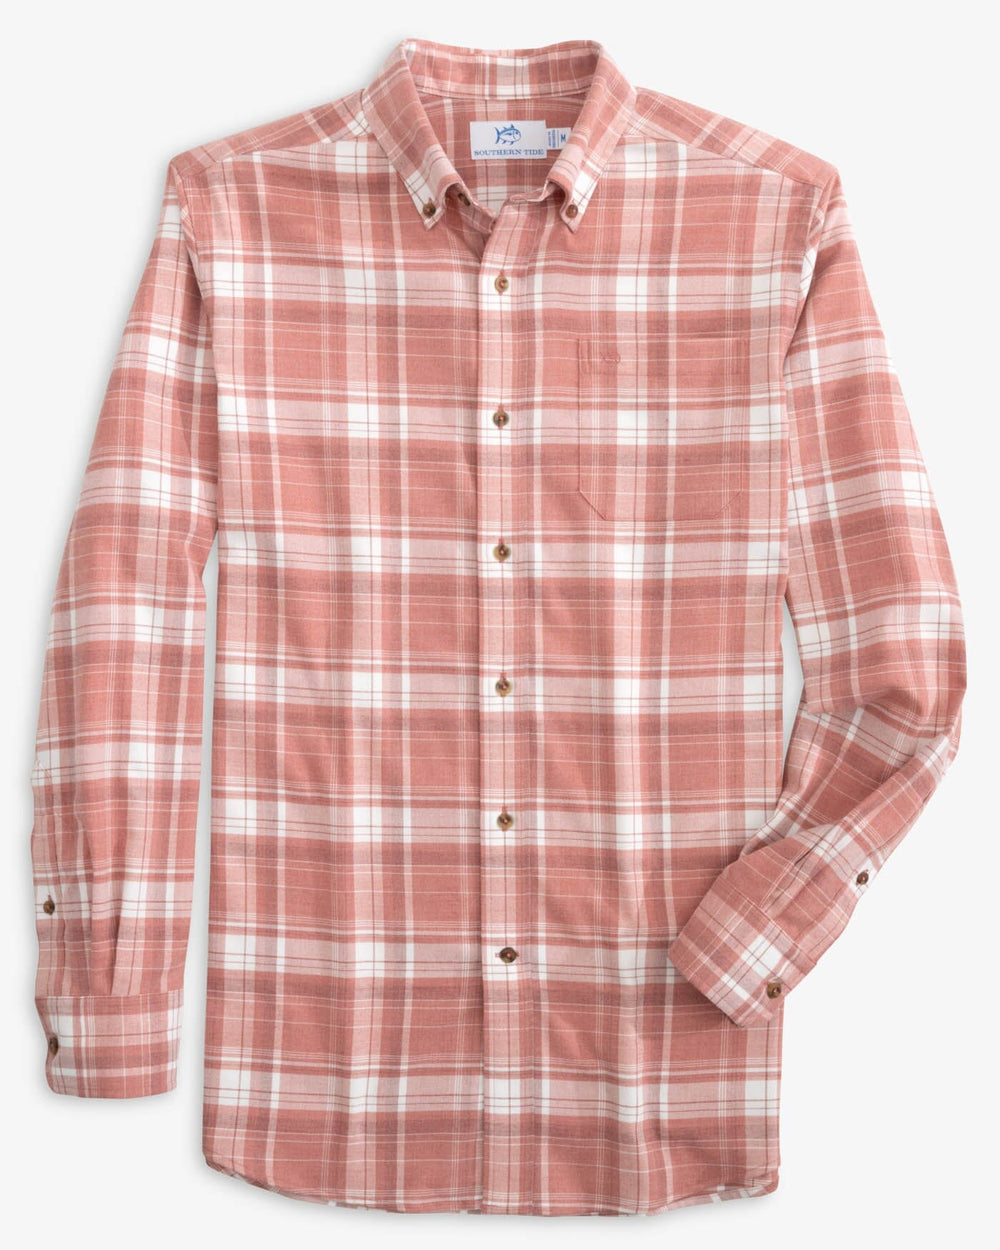 The front view of the Southern Tide Heather Avondale Plaid Sport Shirt by Southern Tide - Heather Dusty Coral